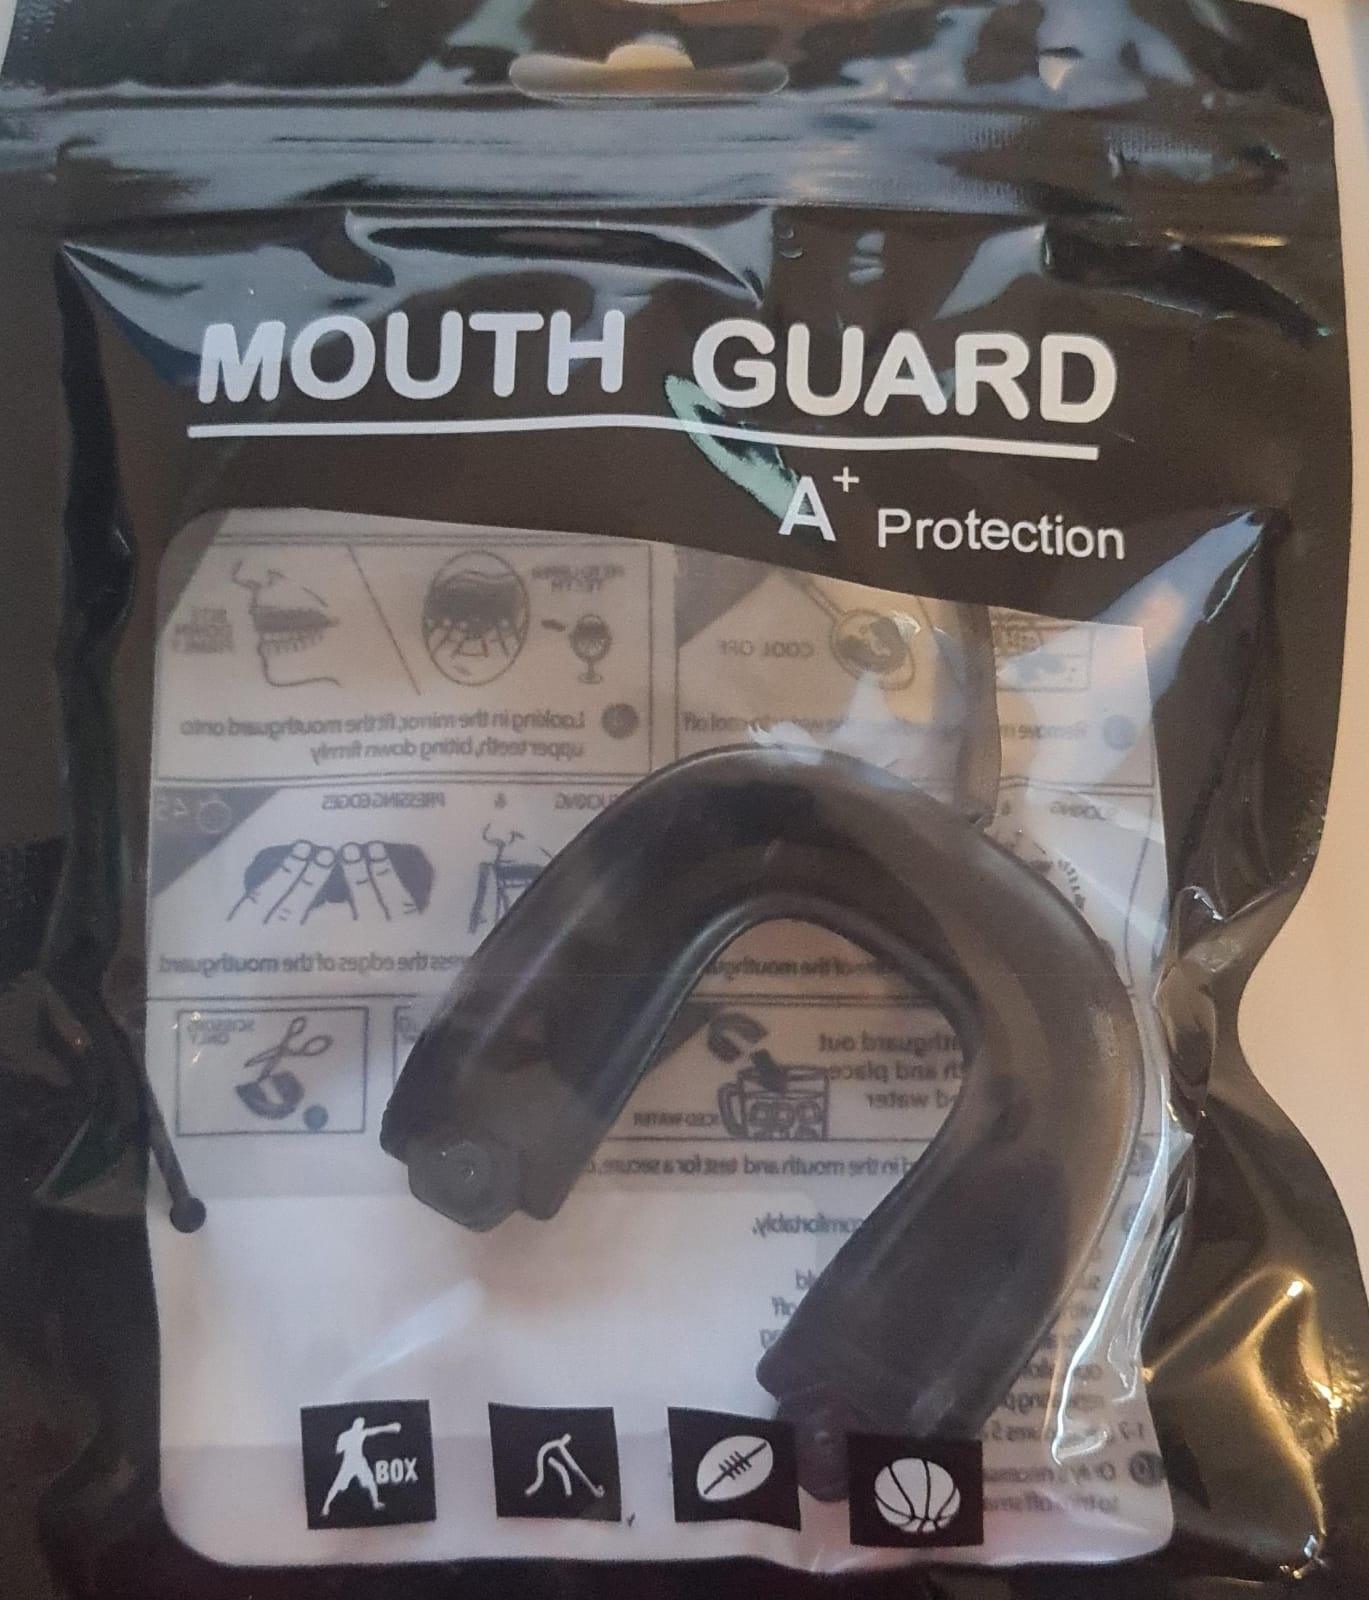 Mouth Guard A+ Protection in schwarz